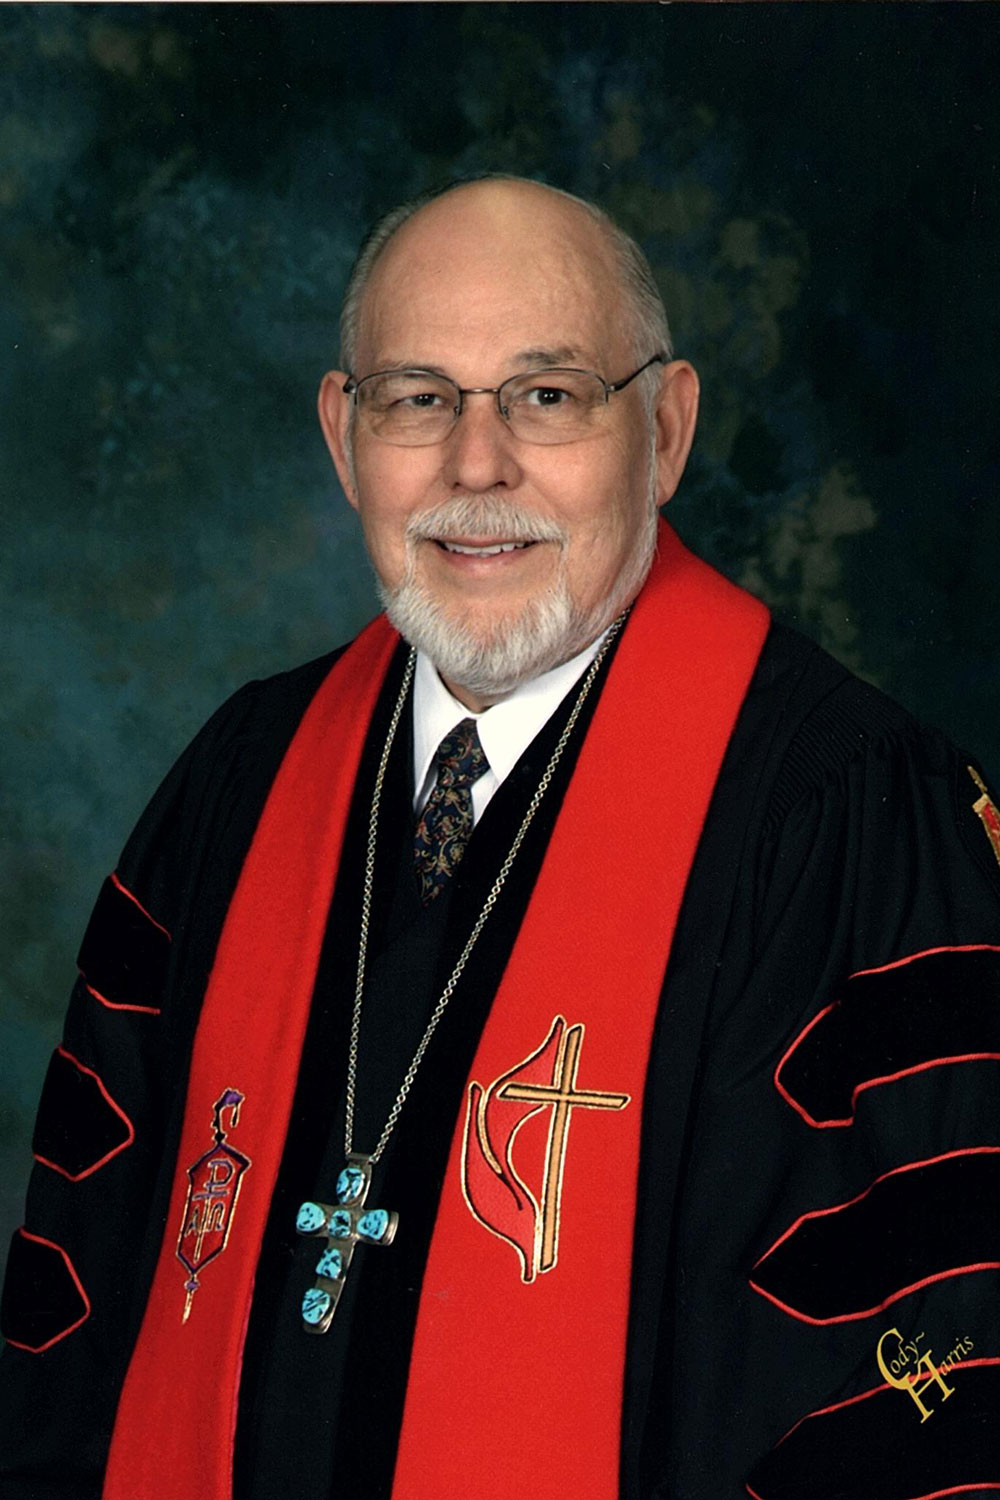 Bishop Joel N. Martinez is a participant in our August 19, 2020 Town Hall. Photo courtesy Bishop Martinez.